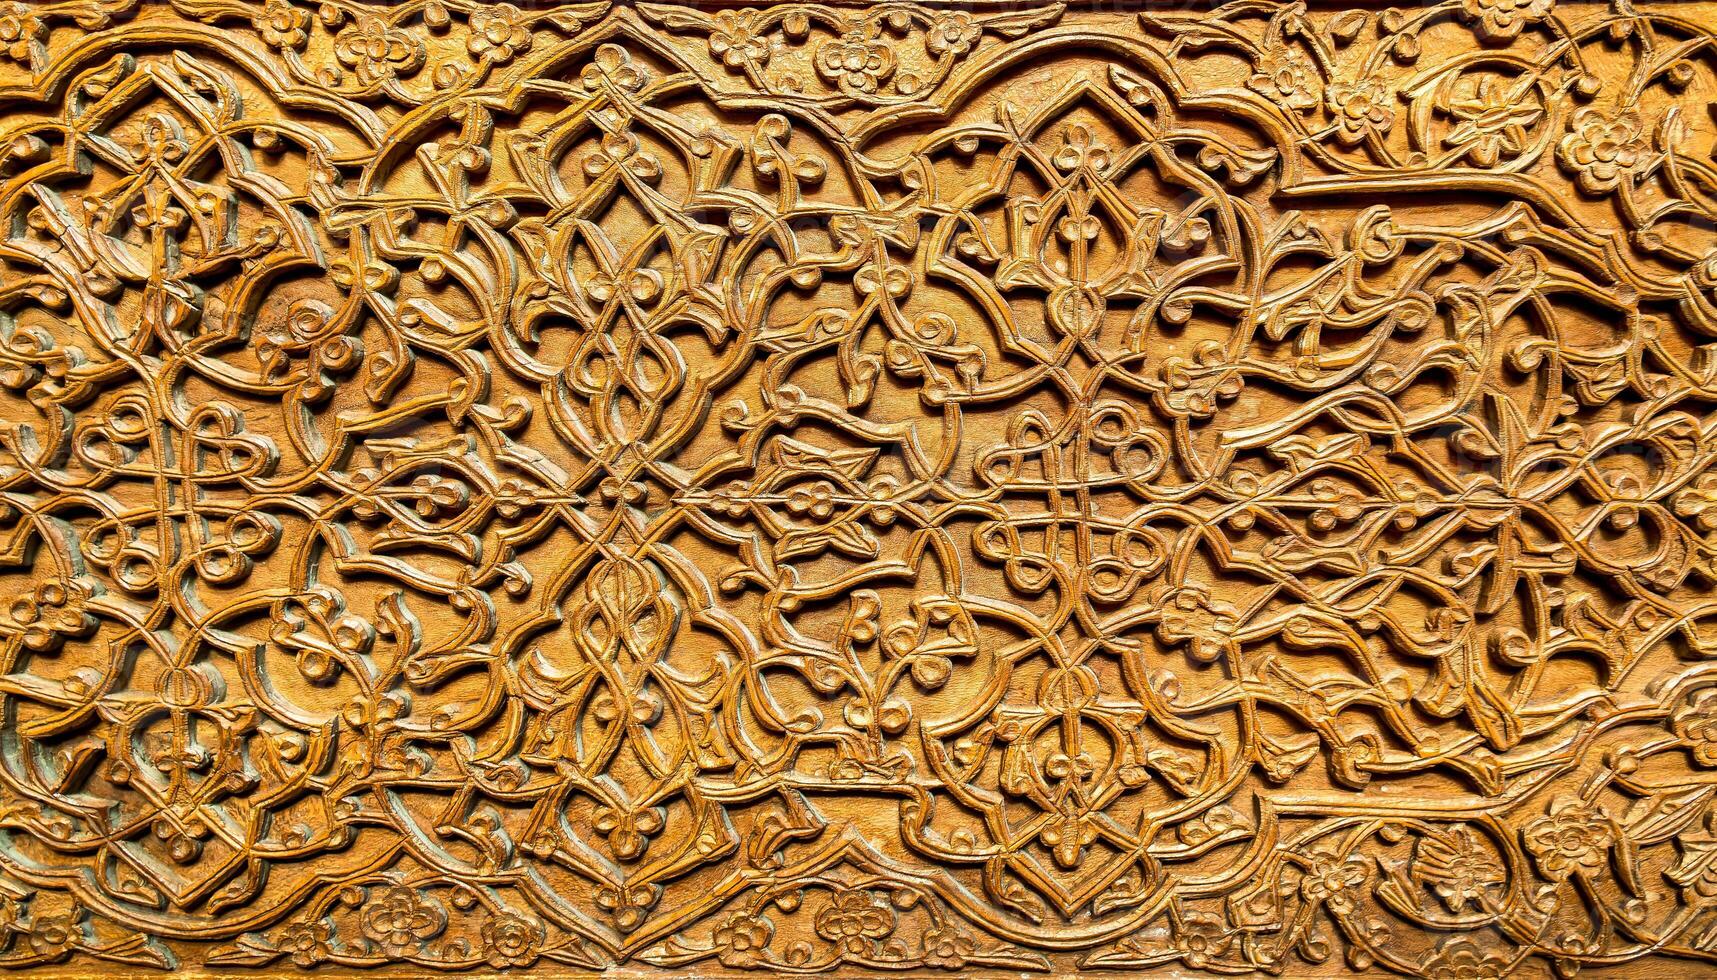 Fragment of an ancient carved wooden door. Ornate. photo